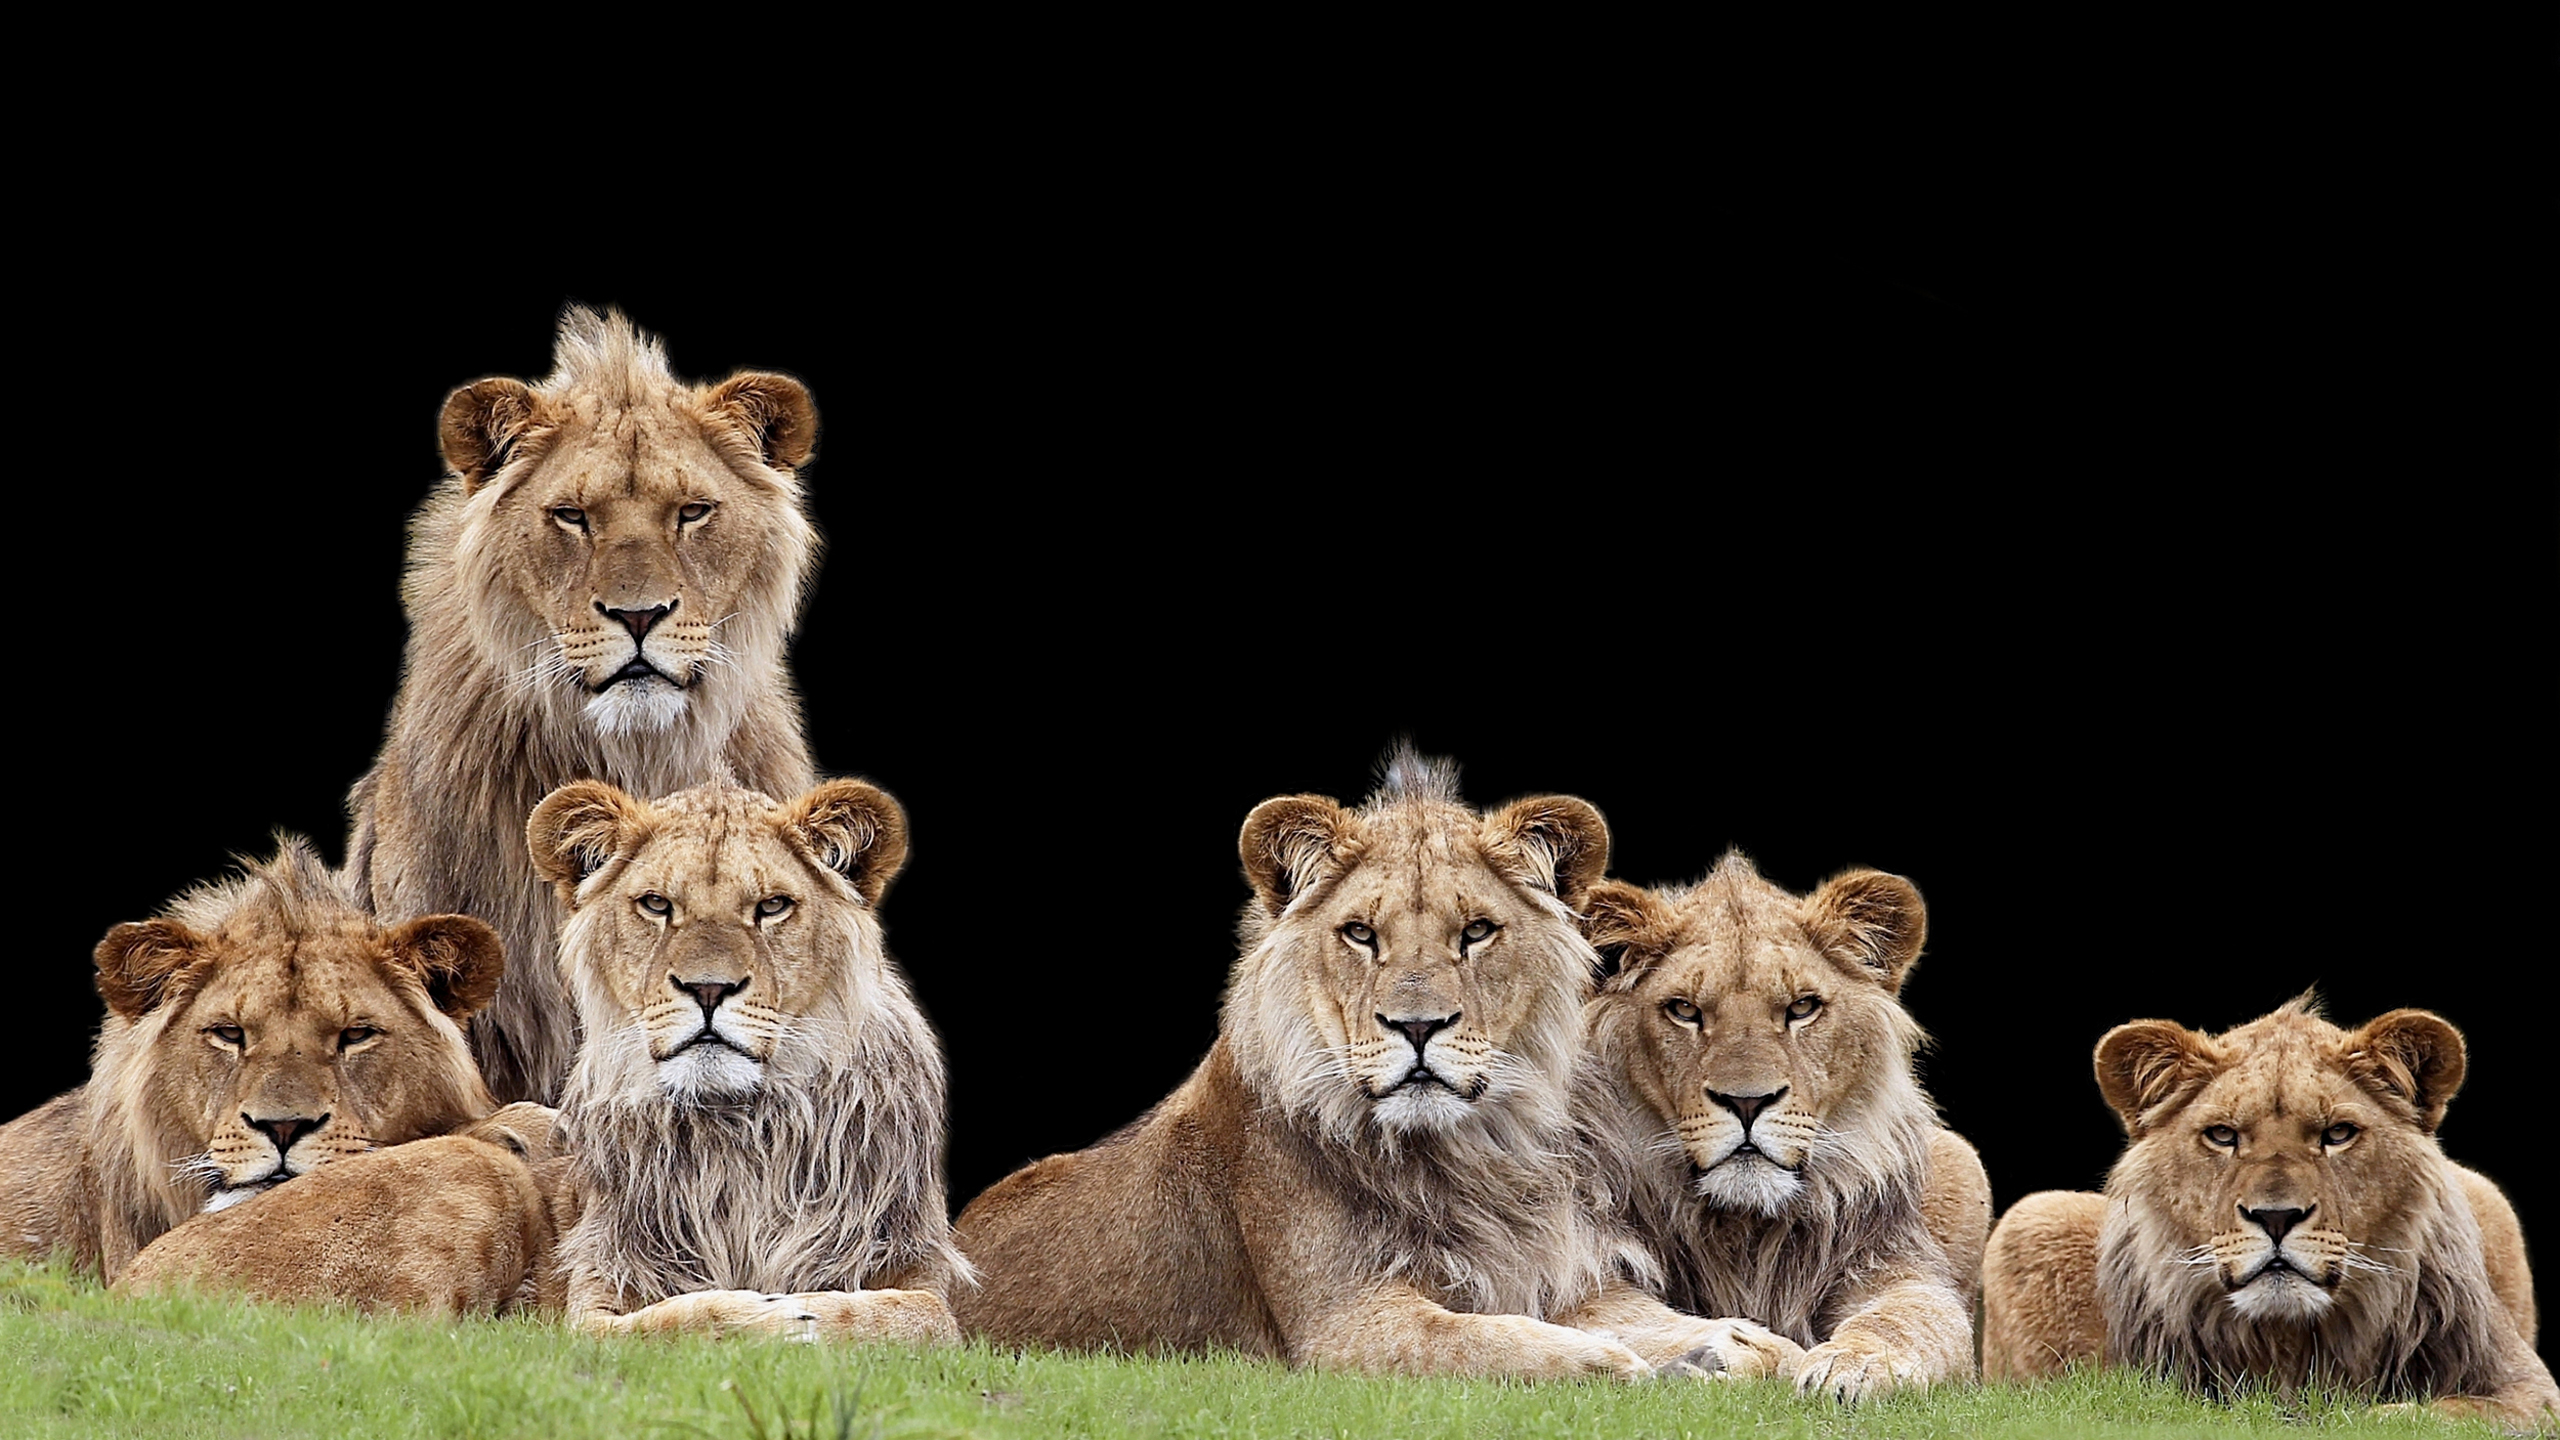 Lions With Black Wallpaper HD Lion